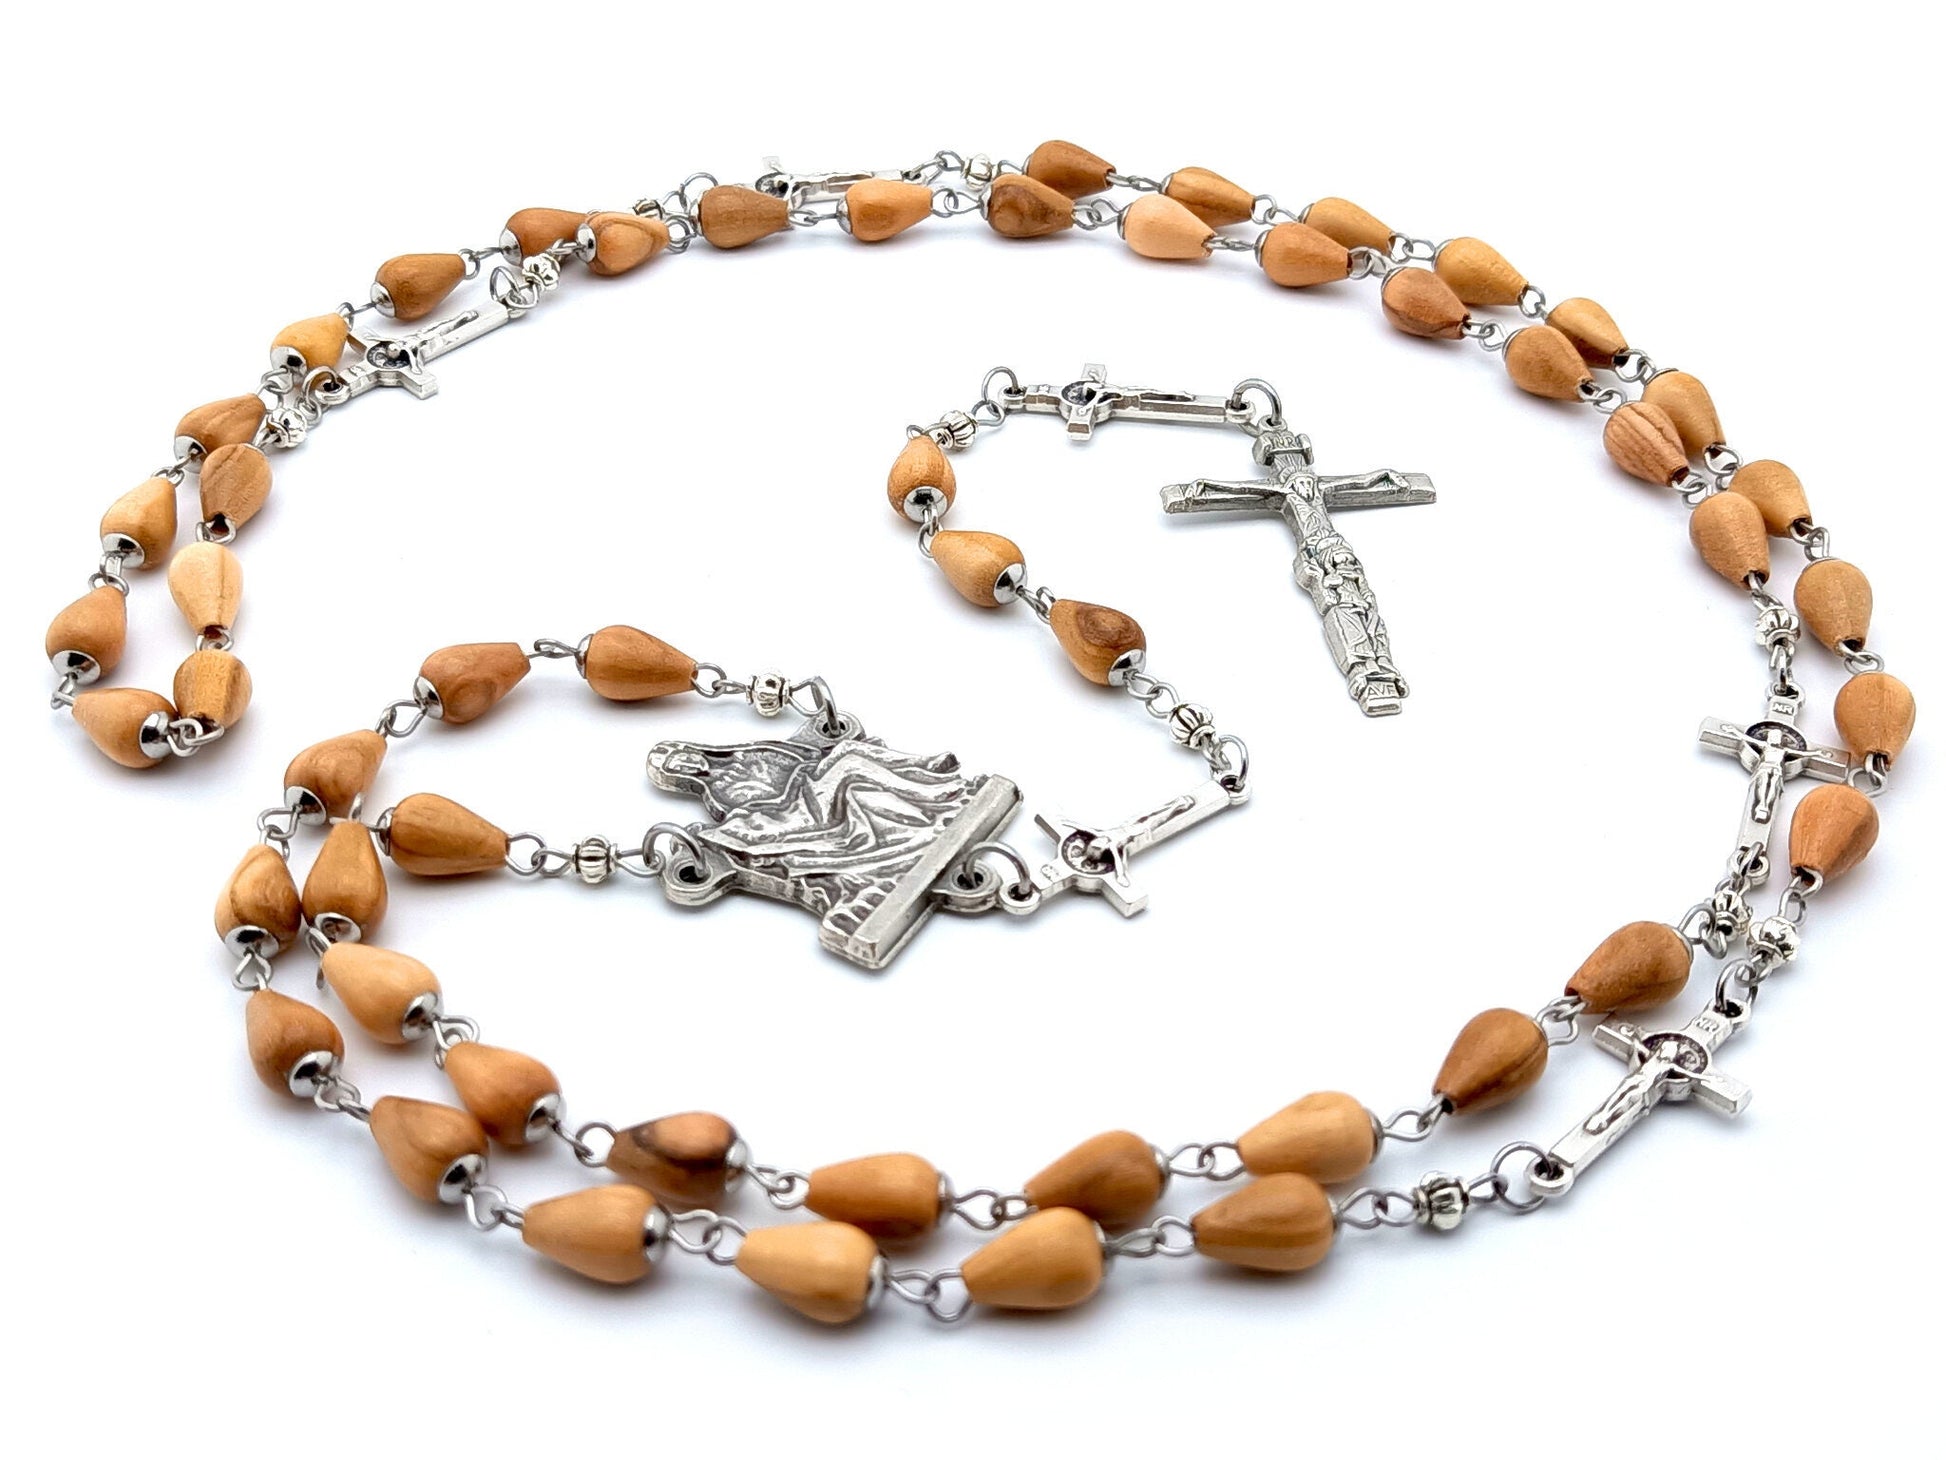 La Pieta unique rosary beads with wooden beads, silver linking crucifix pater beads, and centre medal.